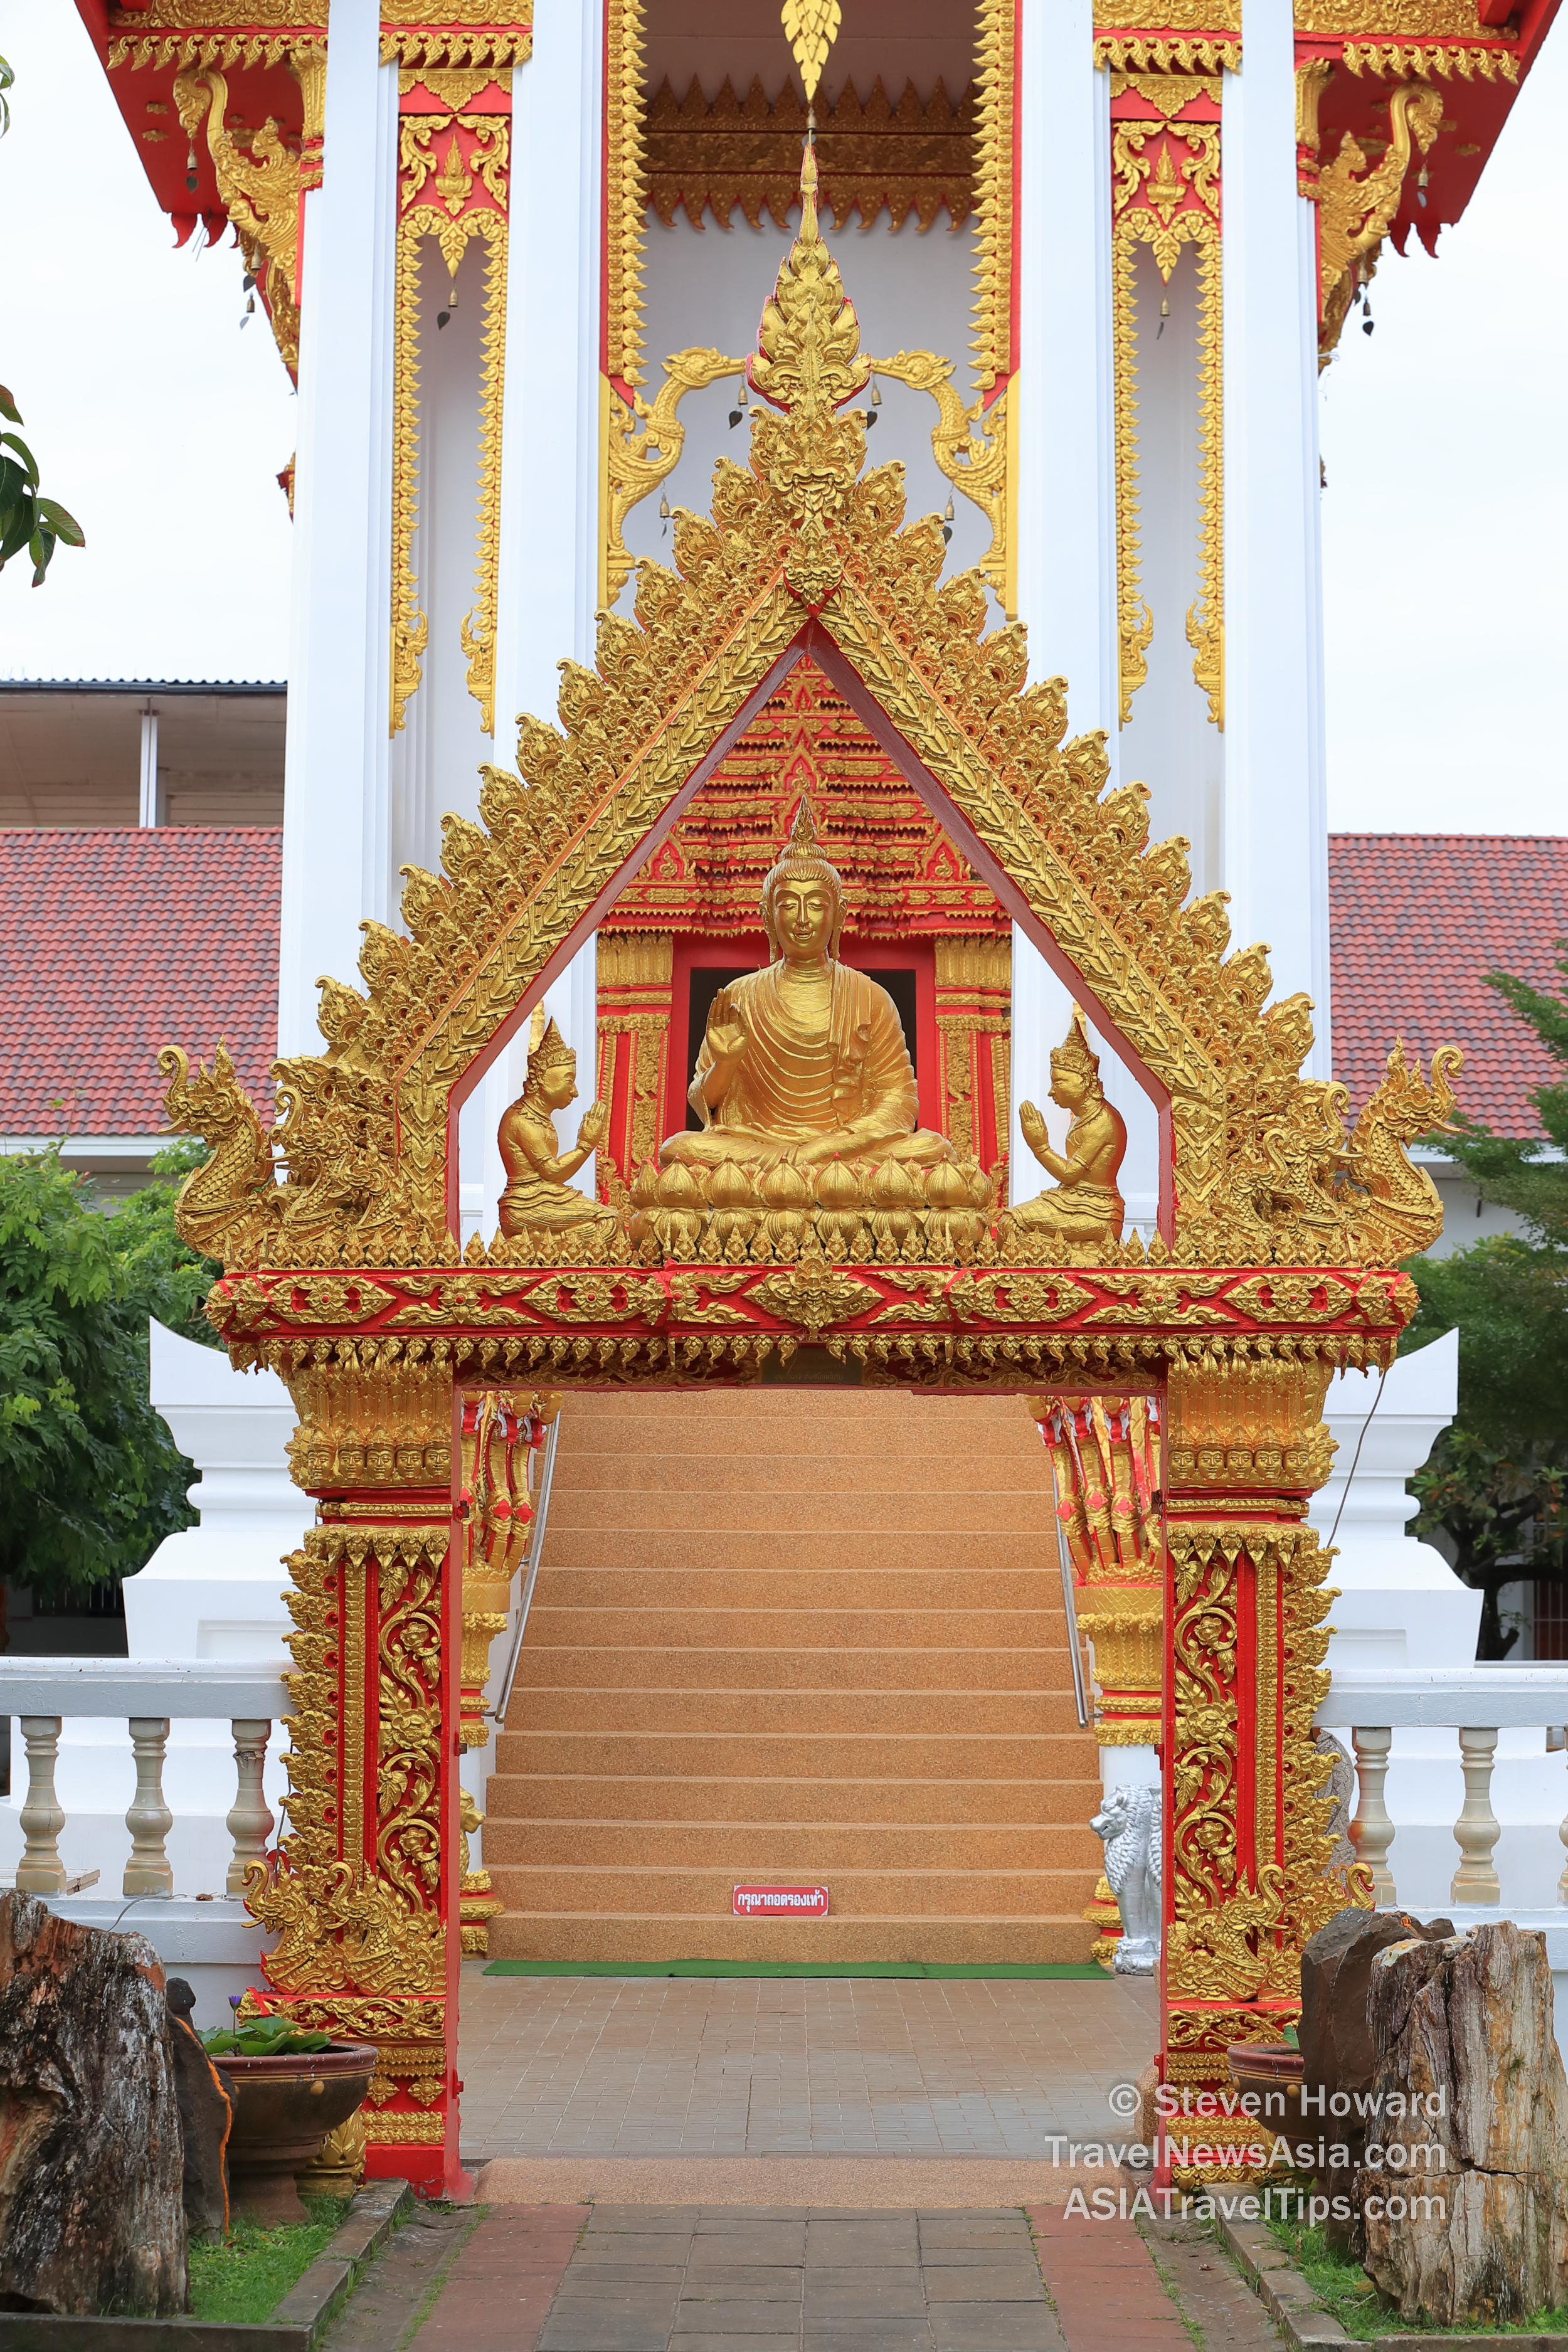 Temple in Ubon Ratchathani, Thailand. Picture by Steven Howard of TravelNewsAsia.com Click to enlarge.